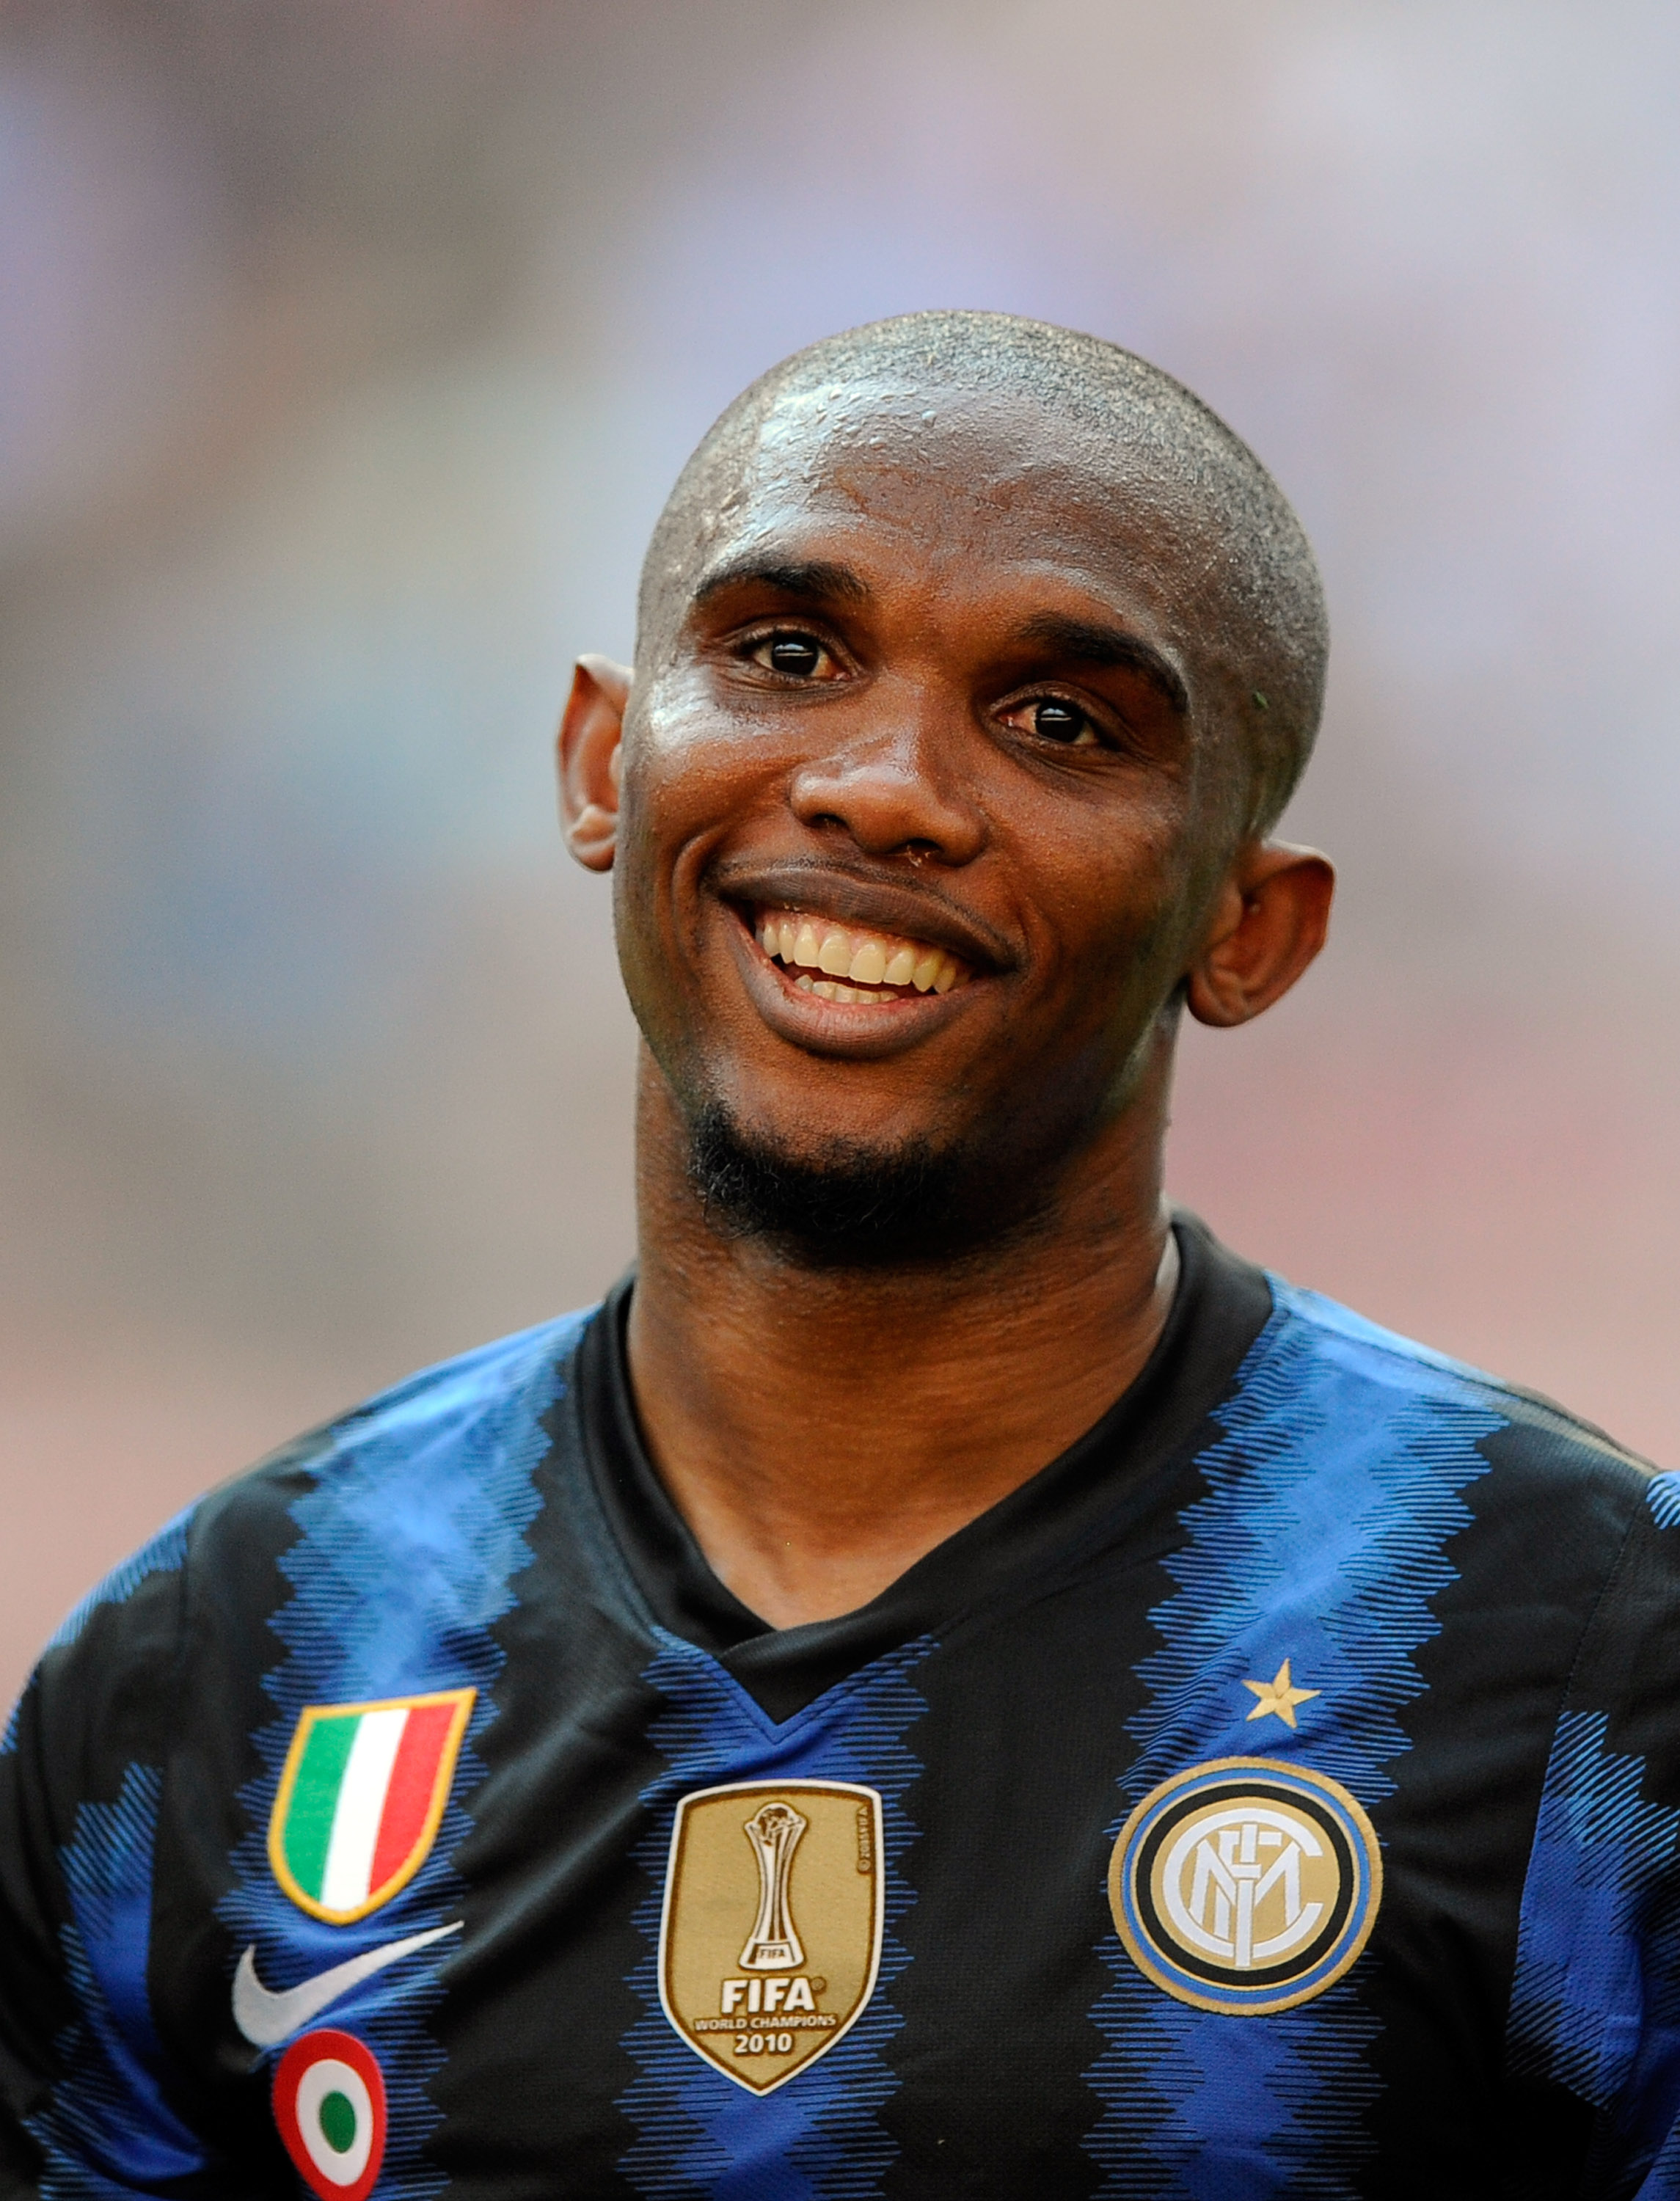 MILAN, ITALY - APRIL 09:  Samuel Eto'o of Inter Milan  during the Serie A match between FC Internazionale Milano and AC Chievo Verona at Stadio Giuseppe Meazza on April 9, 2011 in Milan, Italy.  (Photo by Claudio Villa/Getty Images)